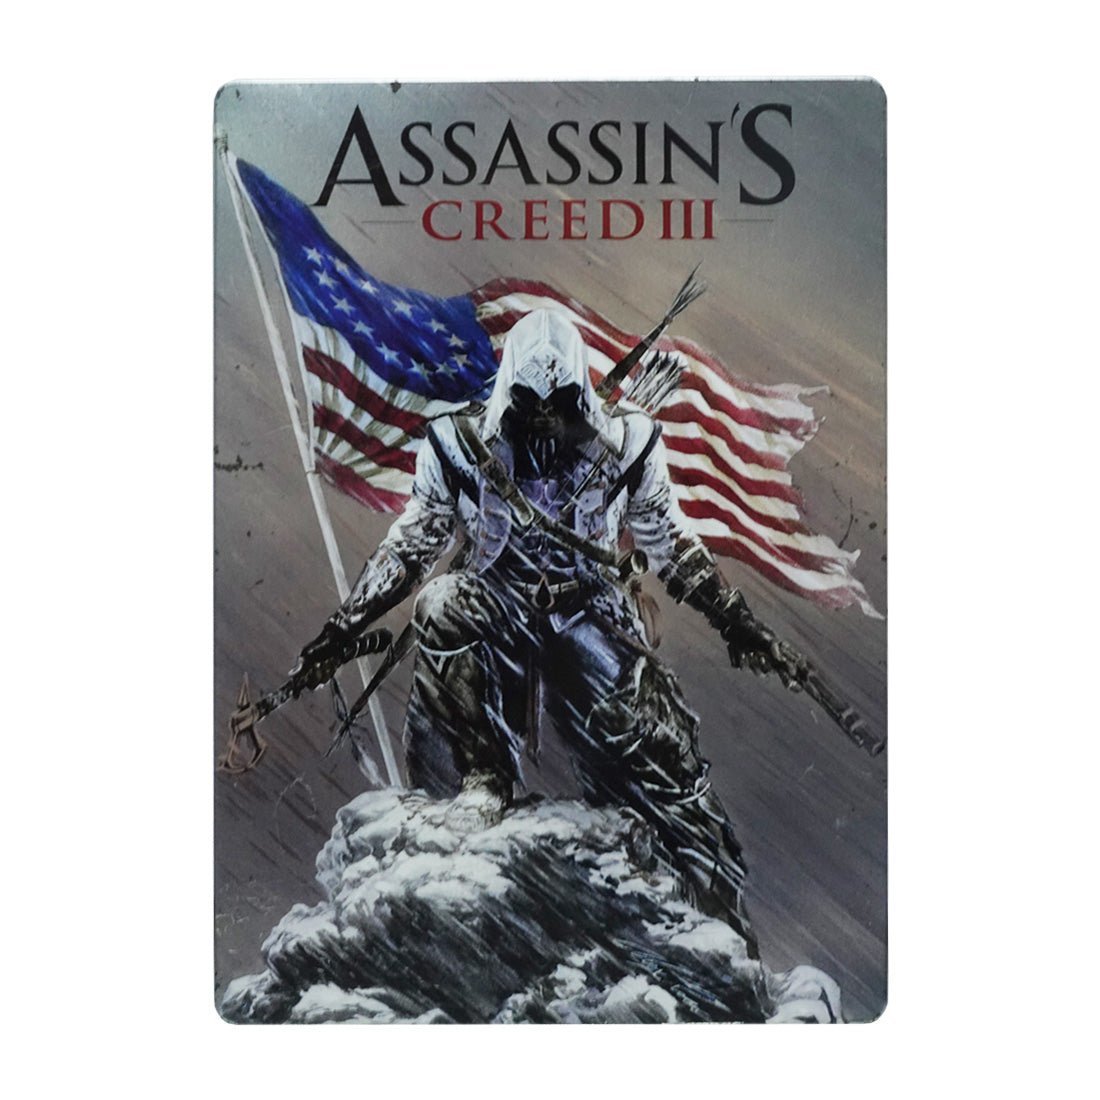 (Pre-Owned) Assassin's Creed III - PlayStation 3 - ريترو - Store 974 | ستور ٩٧٤